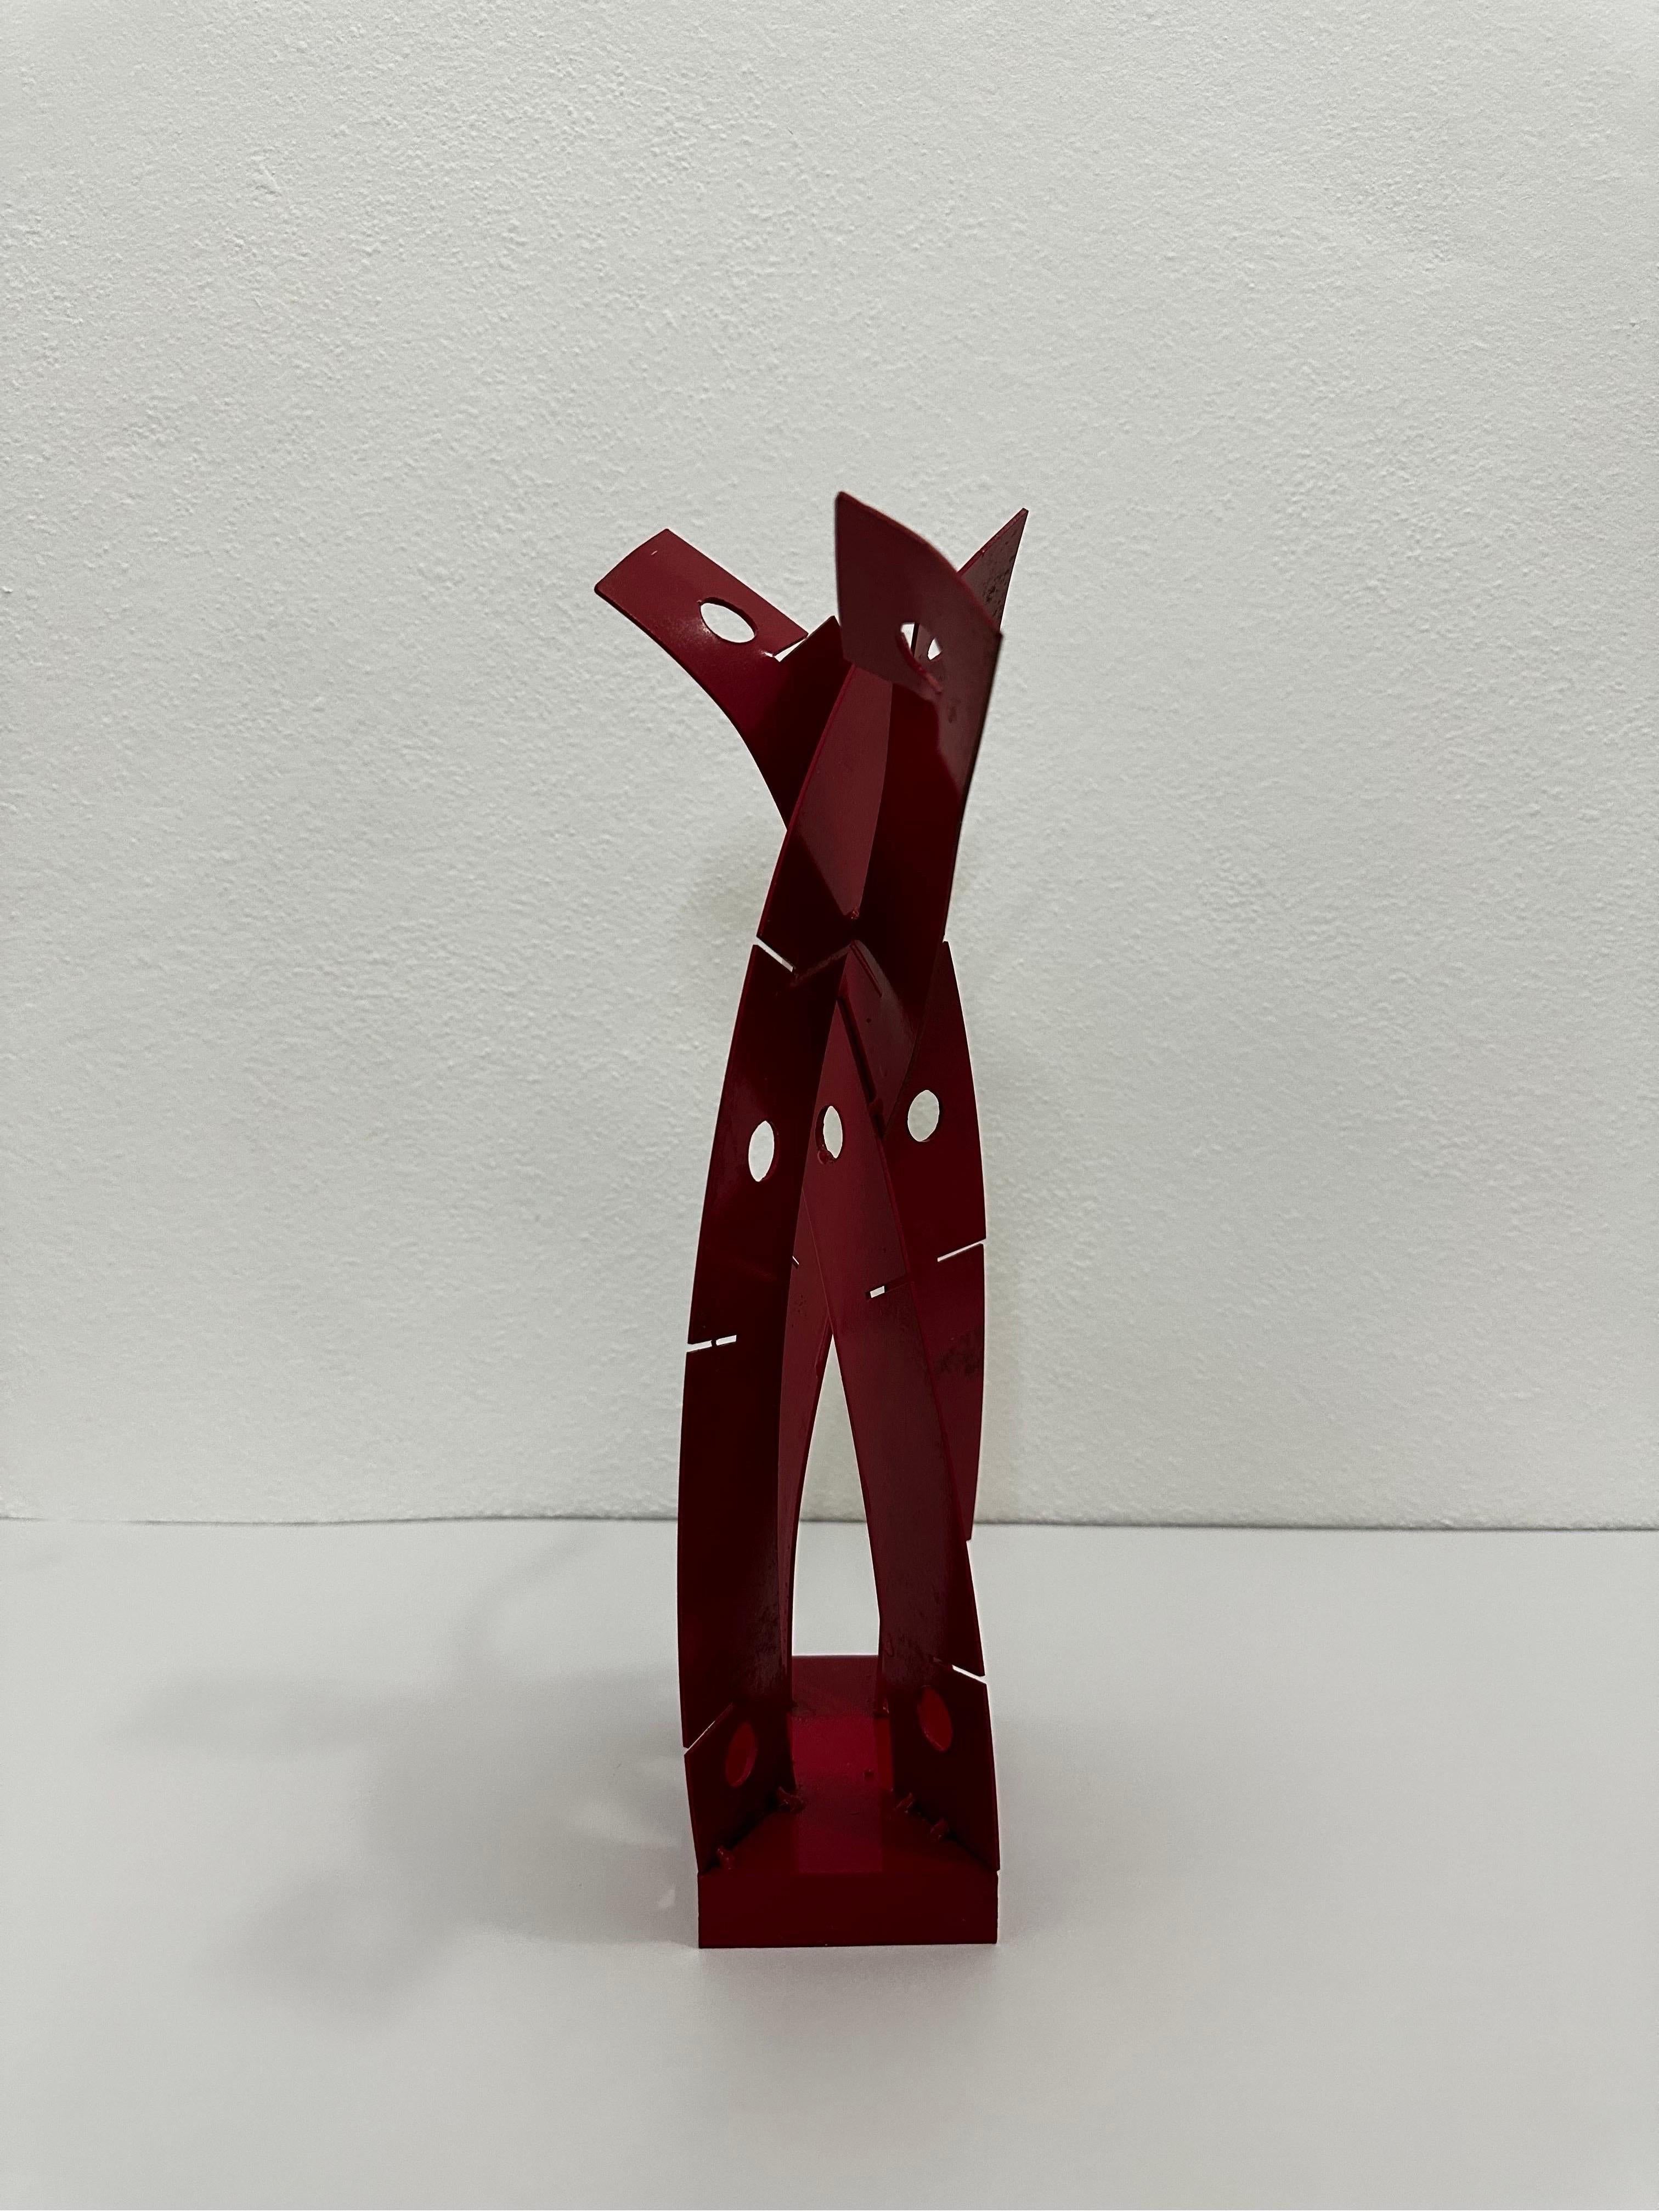 20th Century Brazilian Modern Red Lacquered Steel Table Sculpture, 1980s For Sale